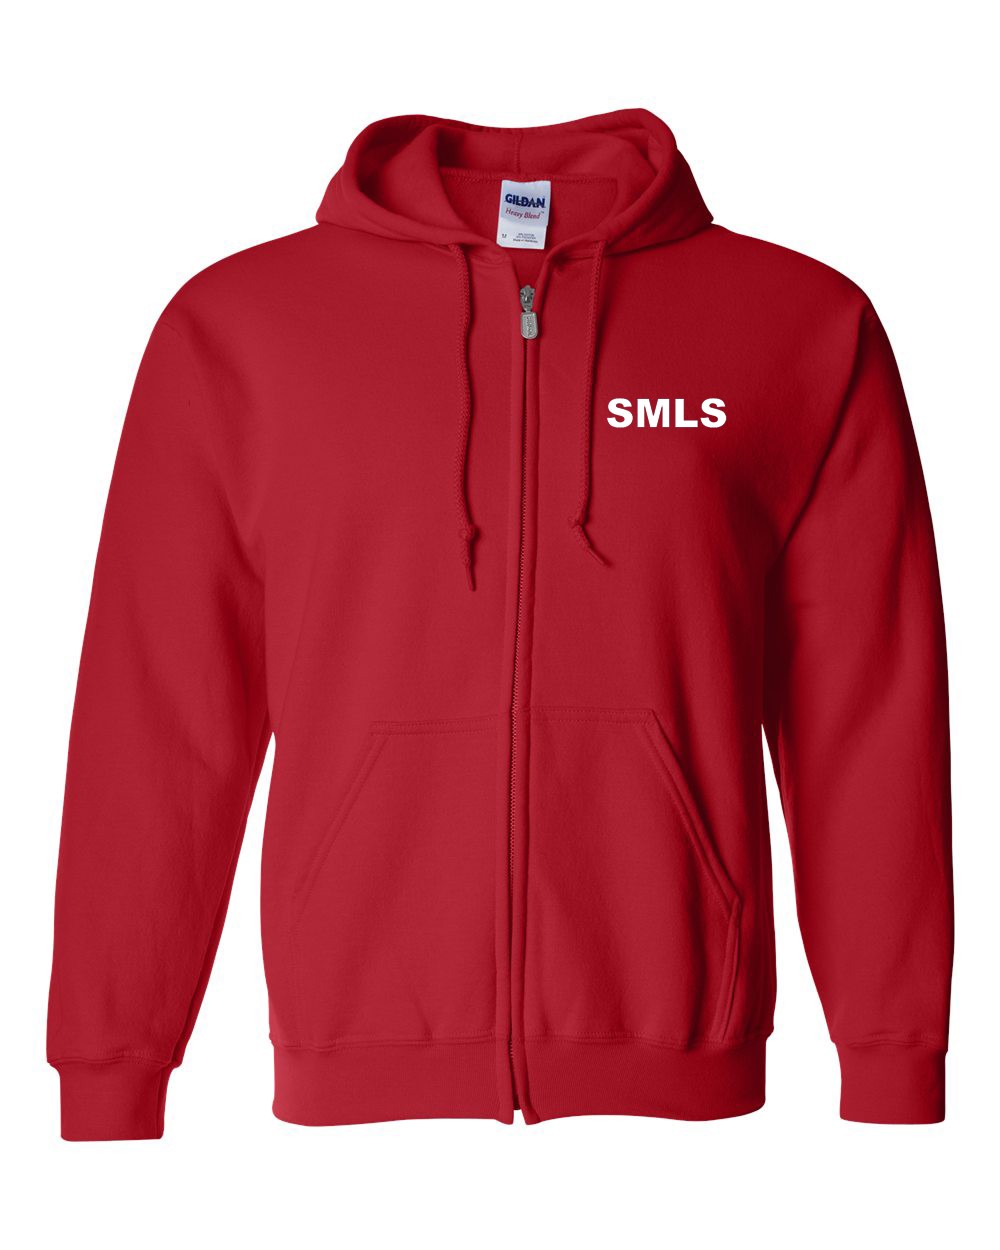 SMLS Spirit Zipper Hoodie w/Logo - Please Allow 2-3 Weeks for Delivery